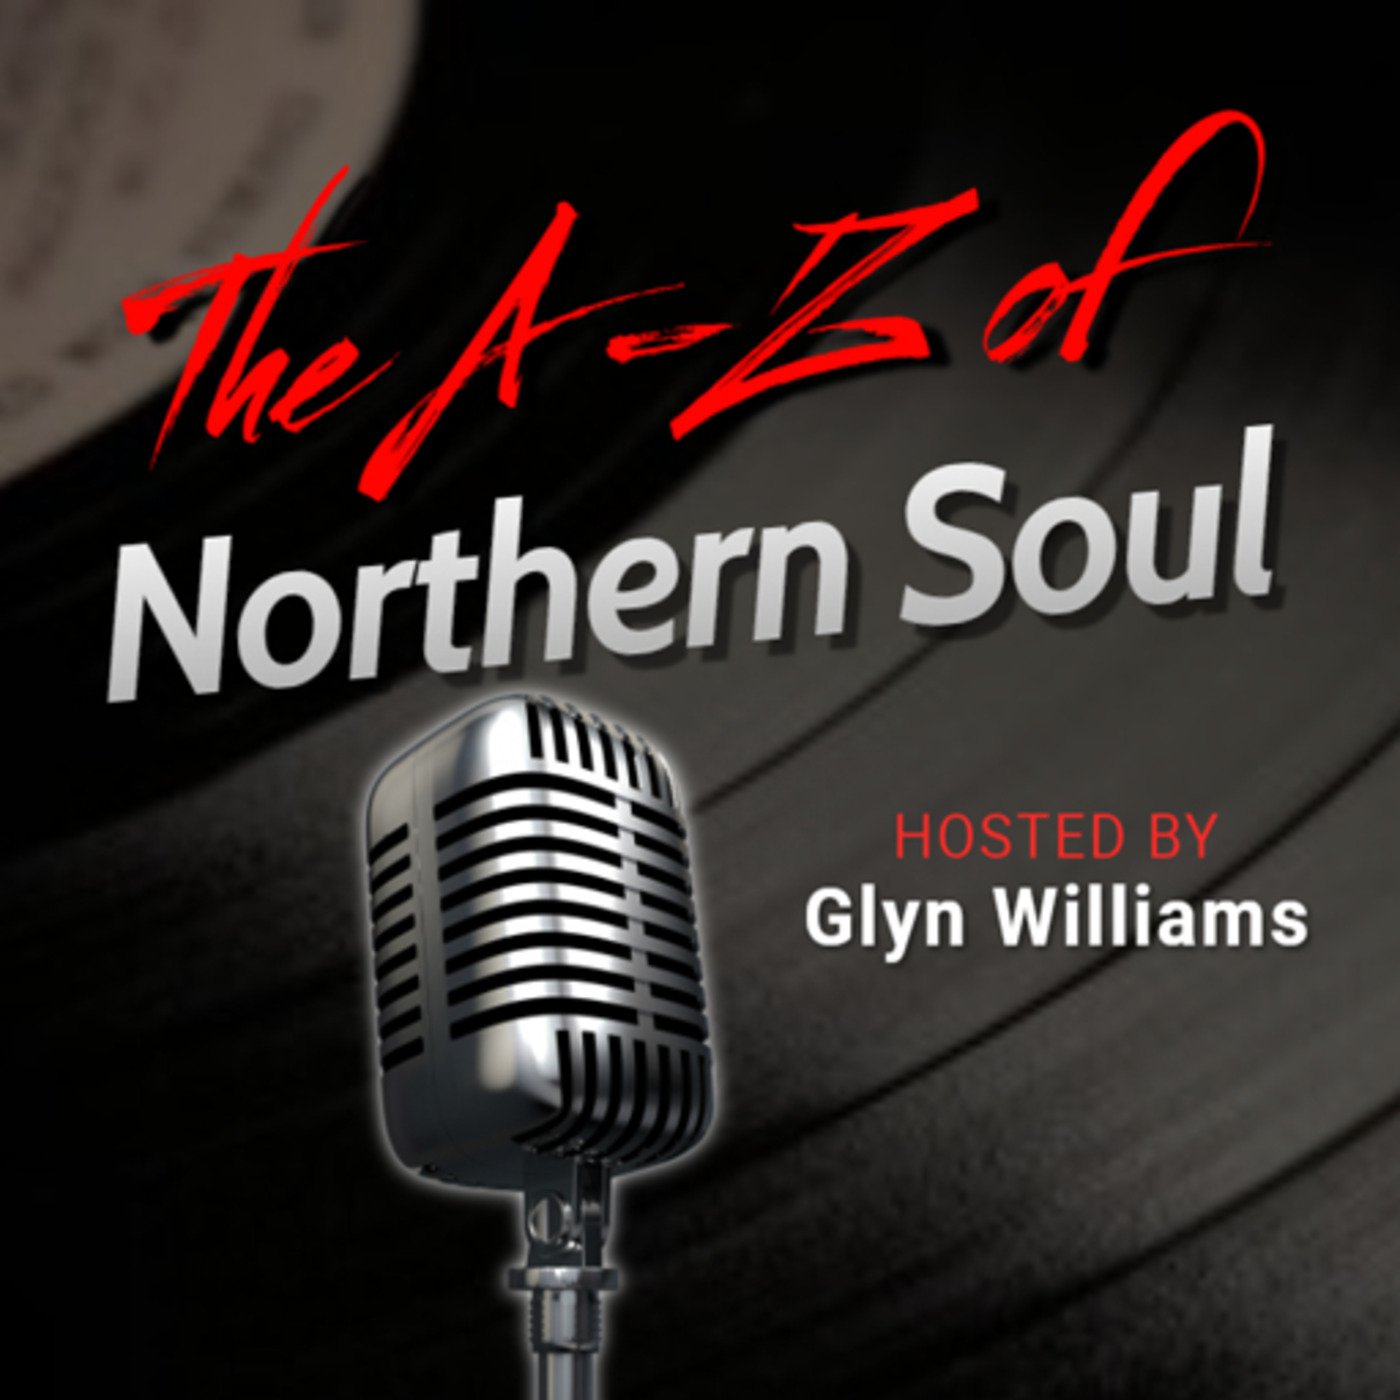 The A-Z of Northern Soul E008